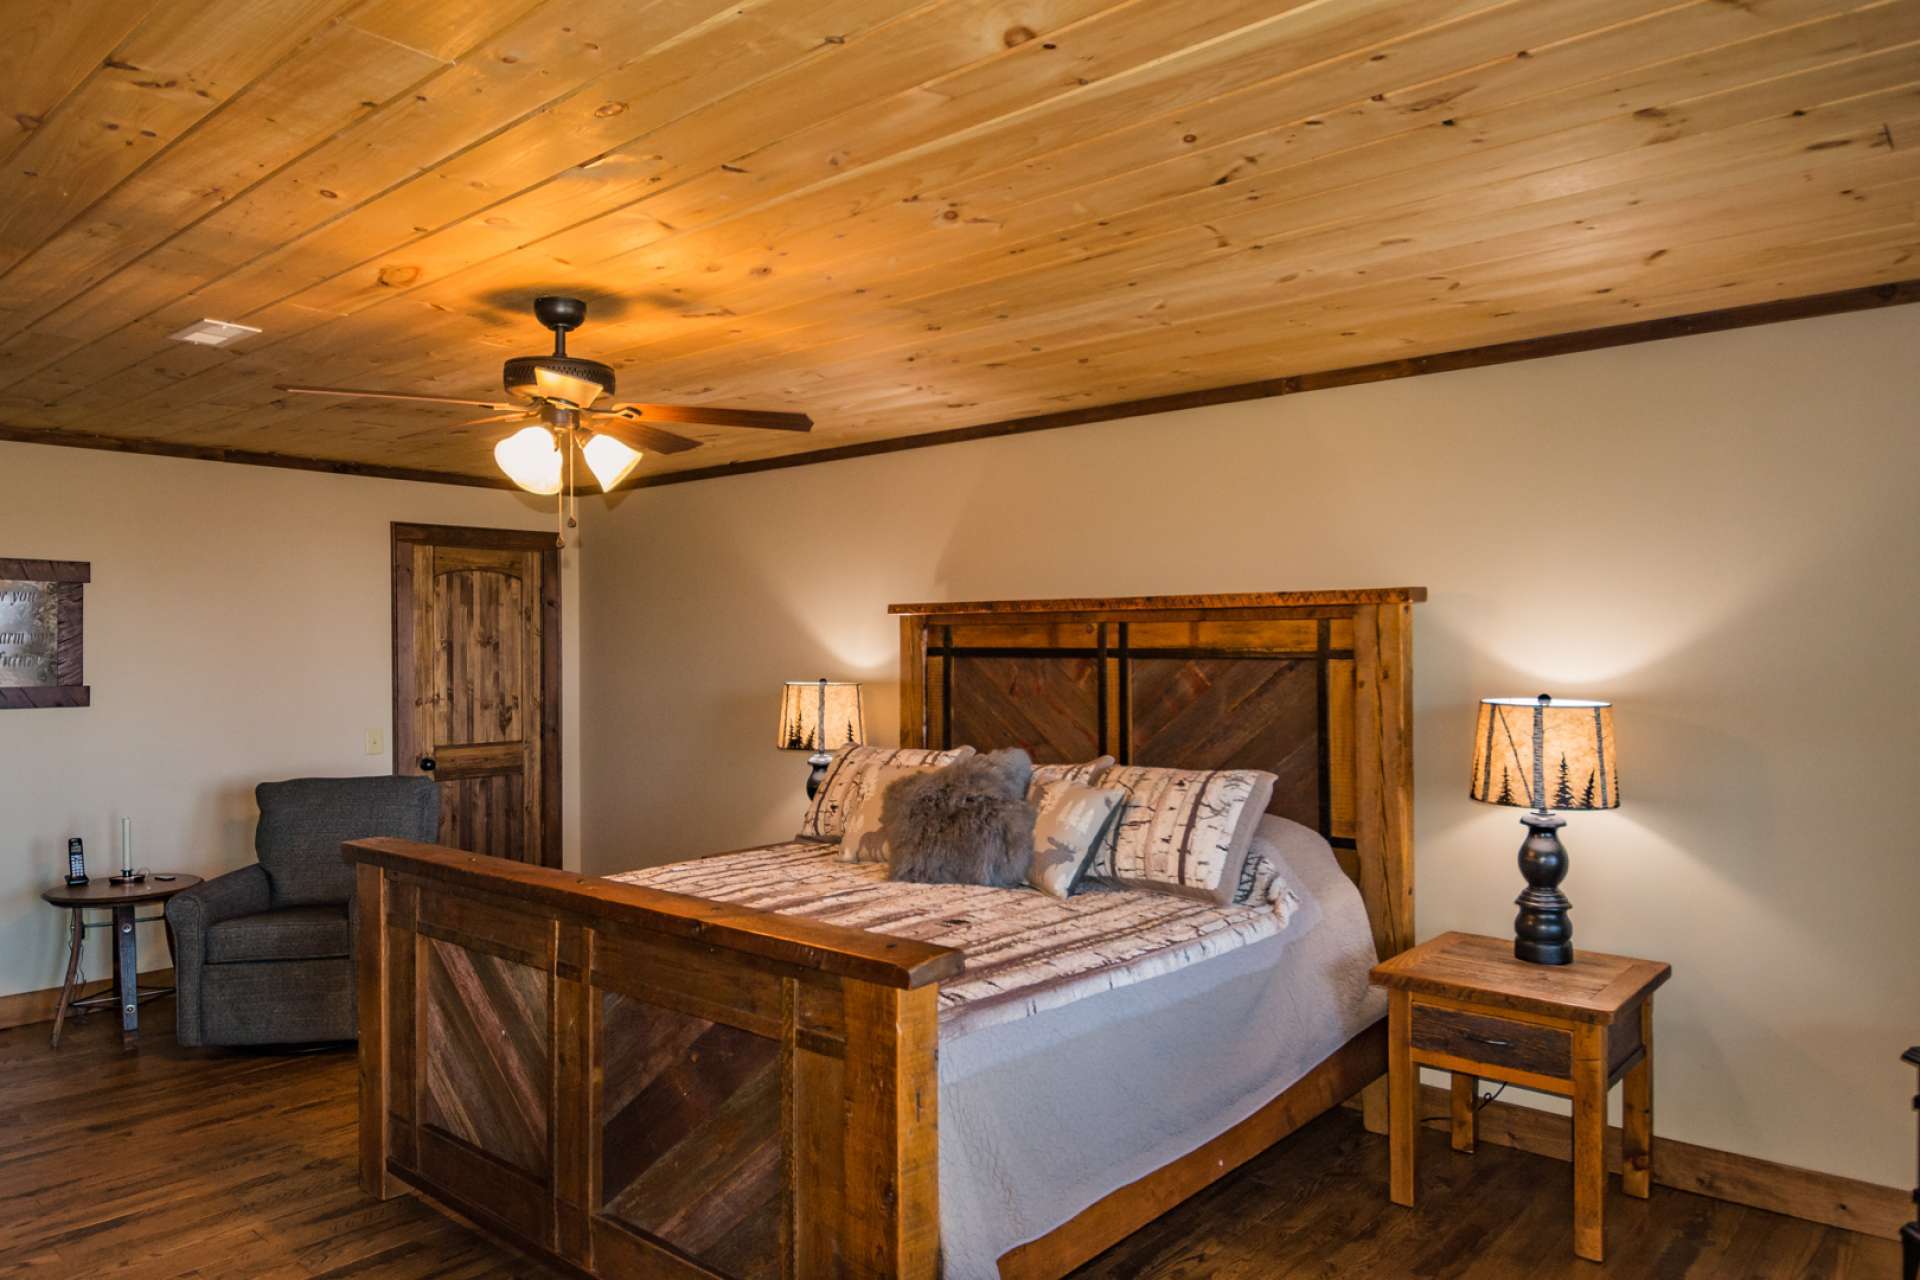 The two lower level bonus rooms are currently utilized as additional sleeping space giving your overnight guests even more privacy and options to enjoy the outdoors and scenery.